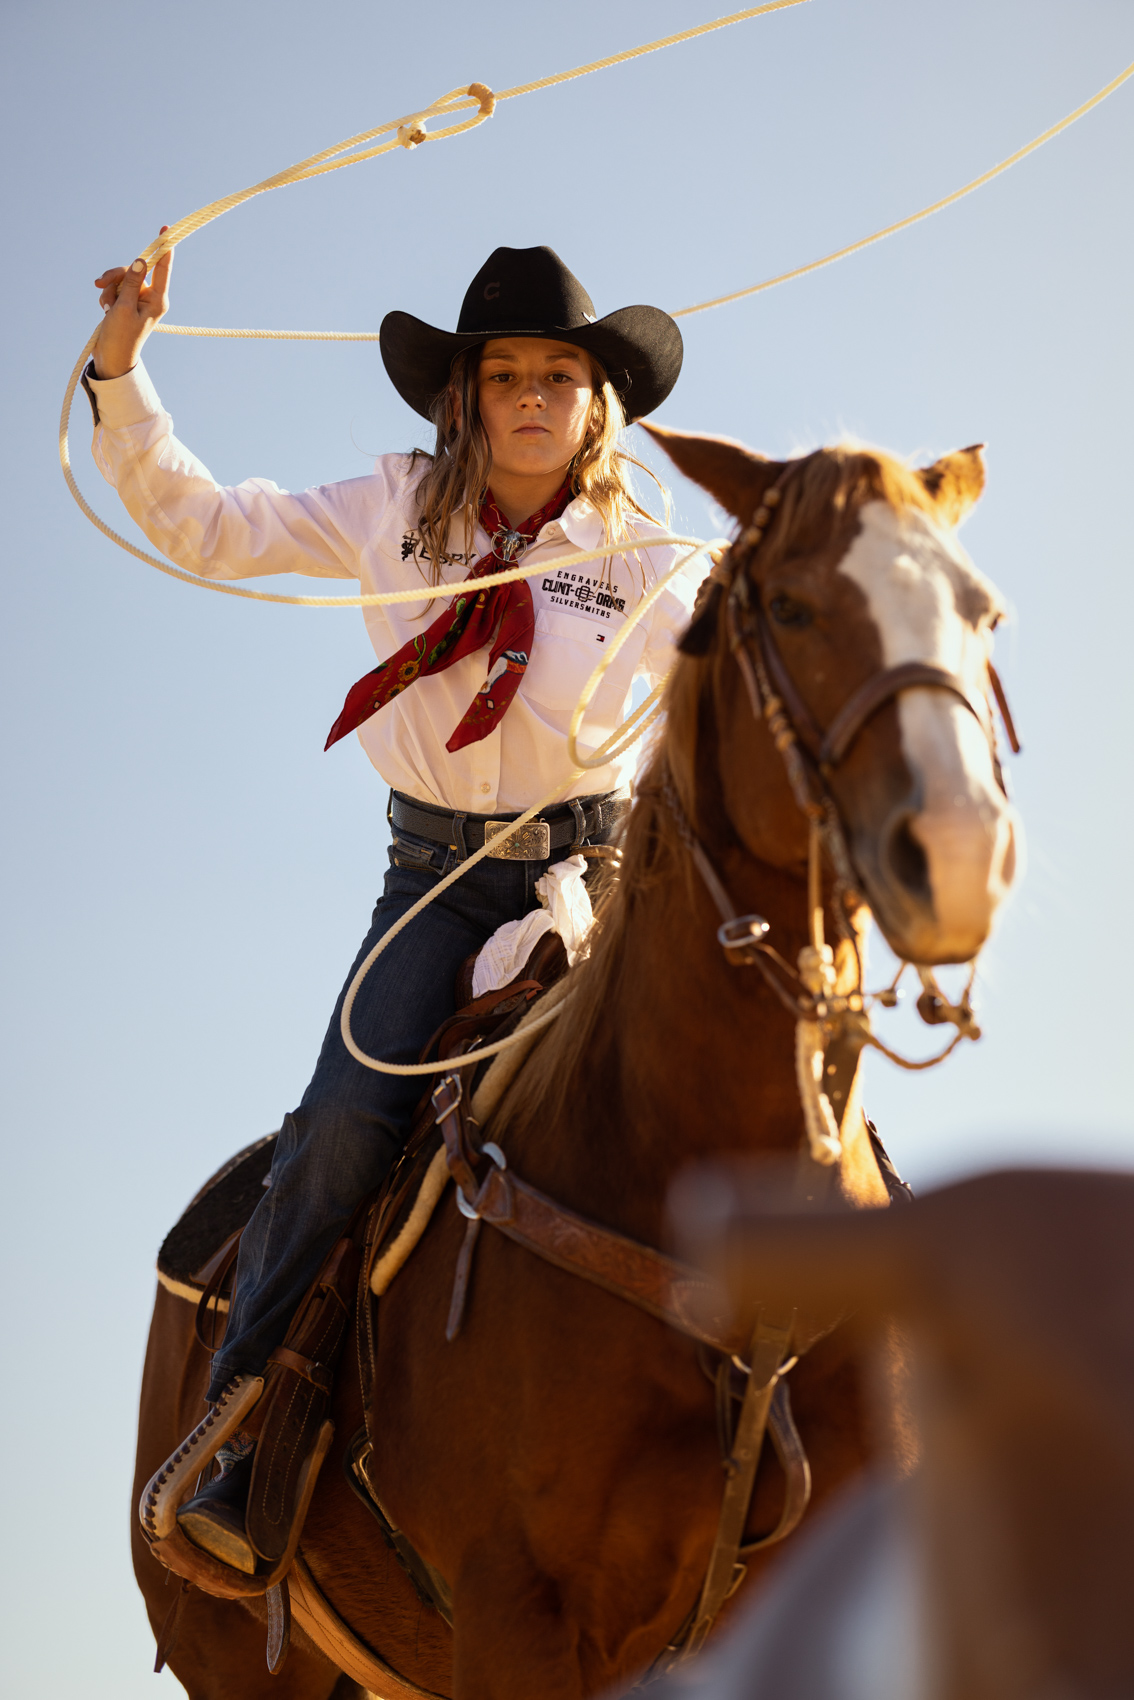 young girl on horse swinging lasso rope